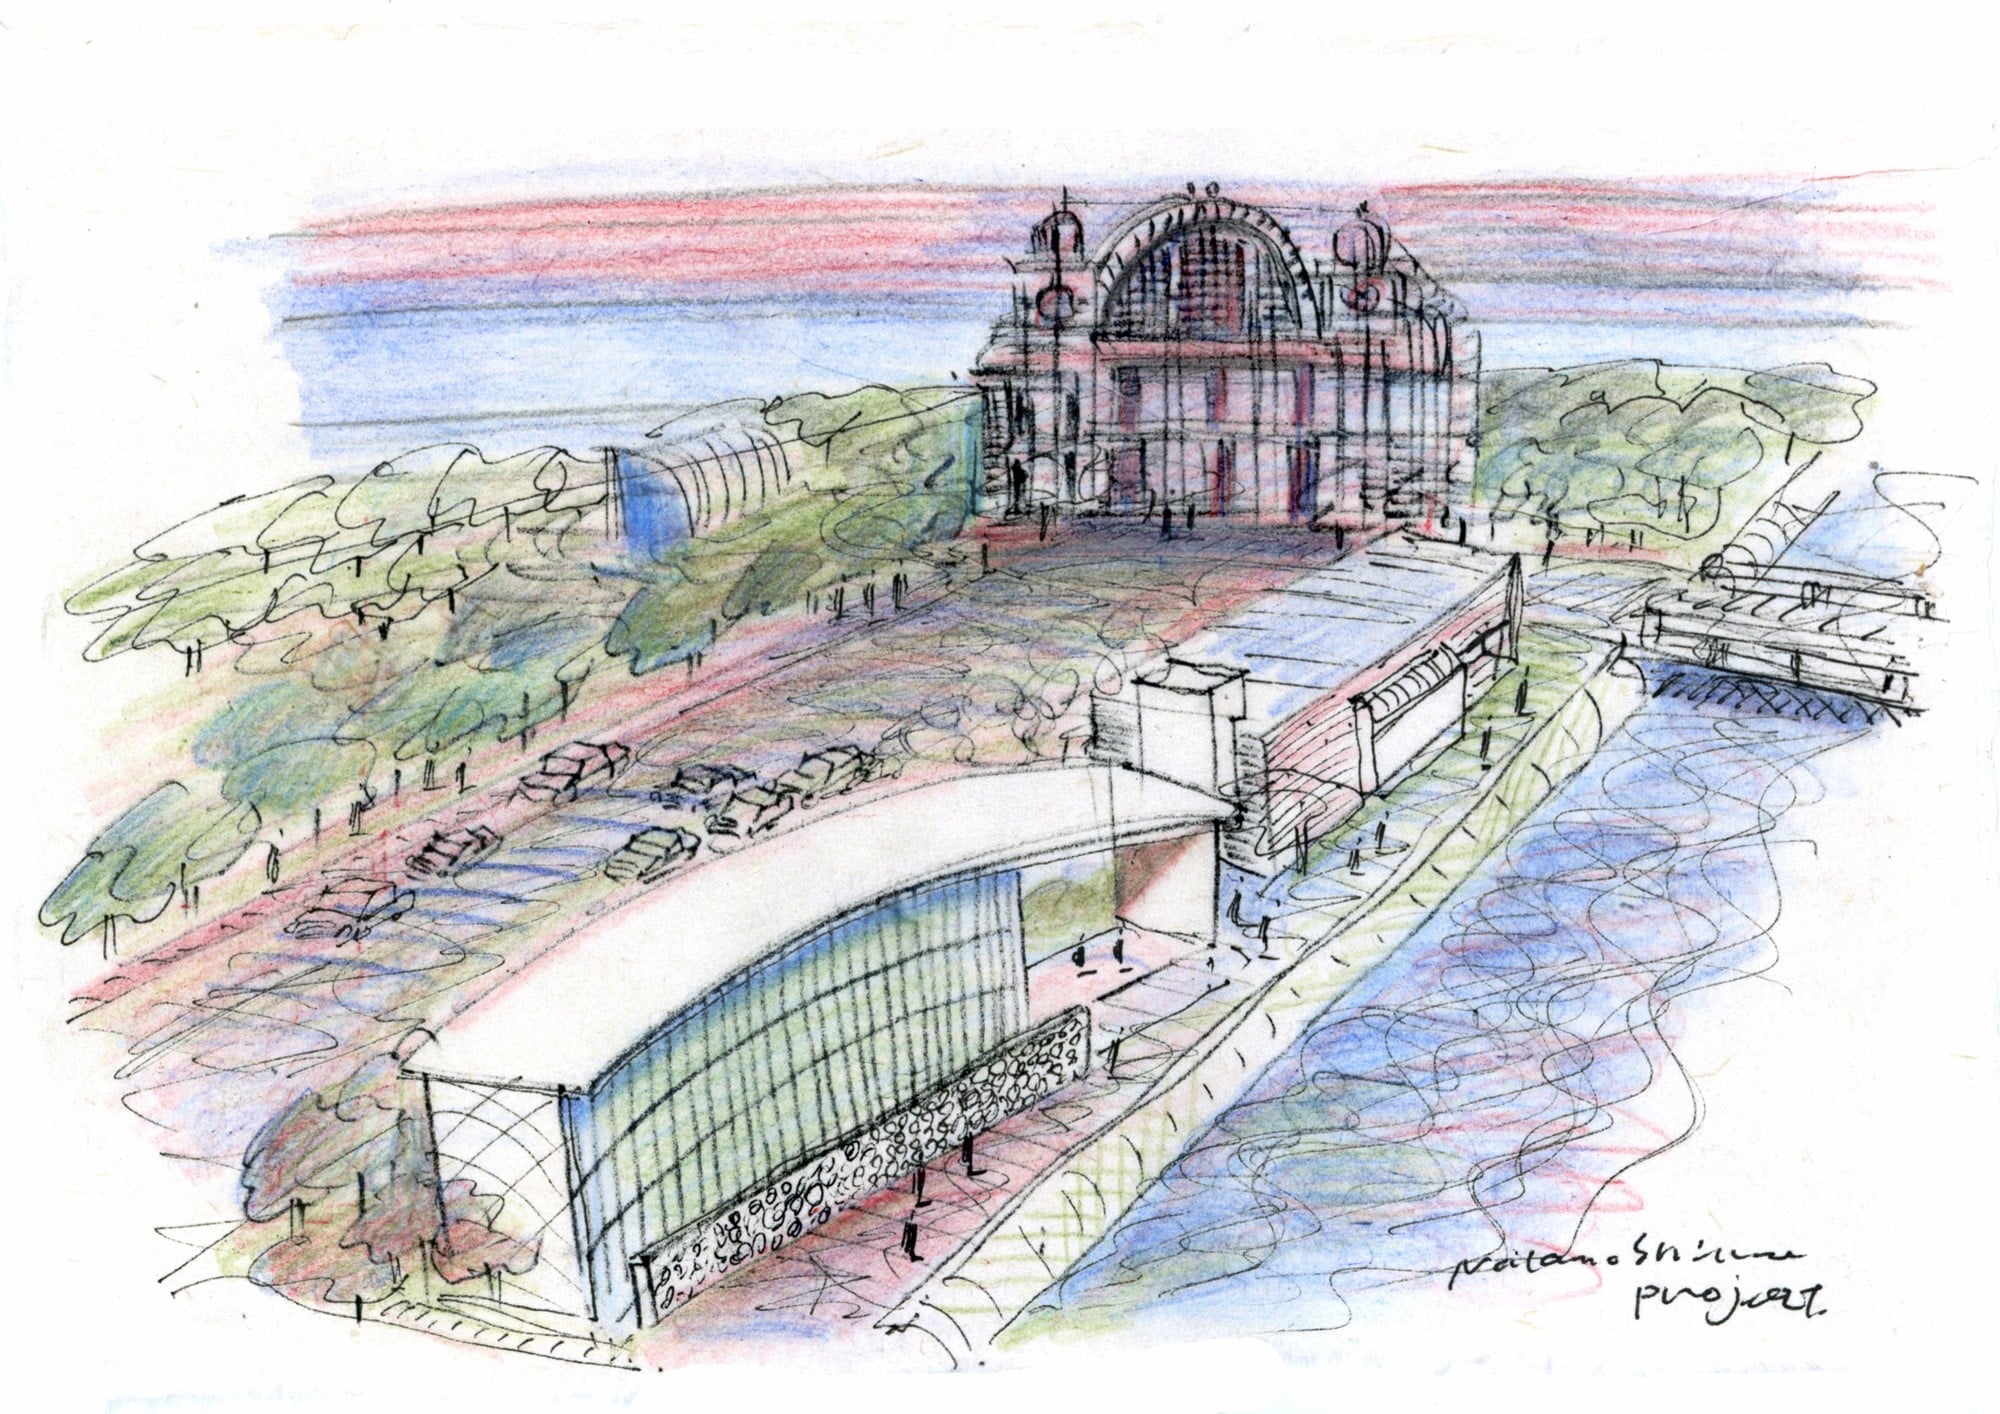  The drawing of Nakanoshima Children’s Book Forest, which is scheduled to open in March  of 2020. Ando himself designed the book forest and donated to Osaka City. He is concerned about the children who are missing the opportunity to read books, and he strongly wishes that they can become familiar with books to develop their expression, imagination and determination. © TADAO ANDO ARCHITECT & ASSOCIATES